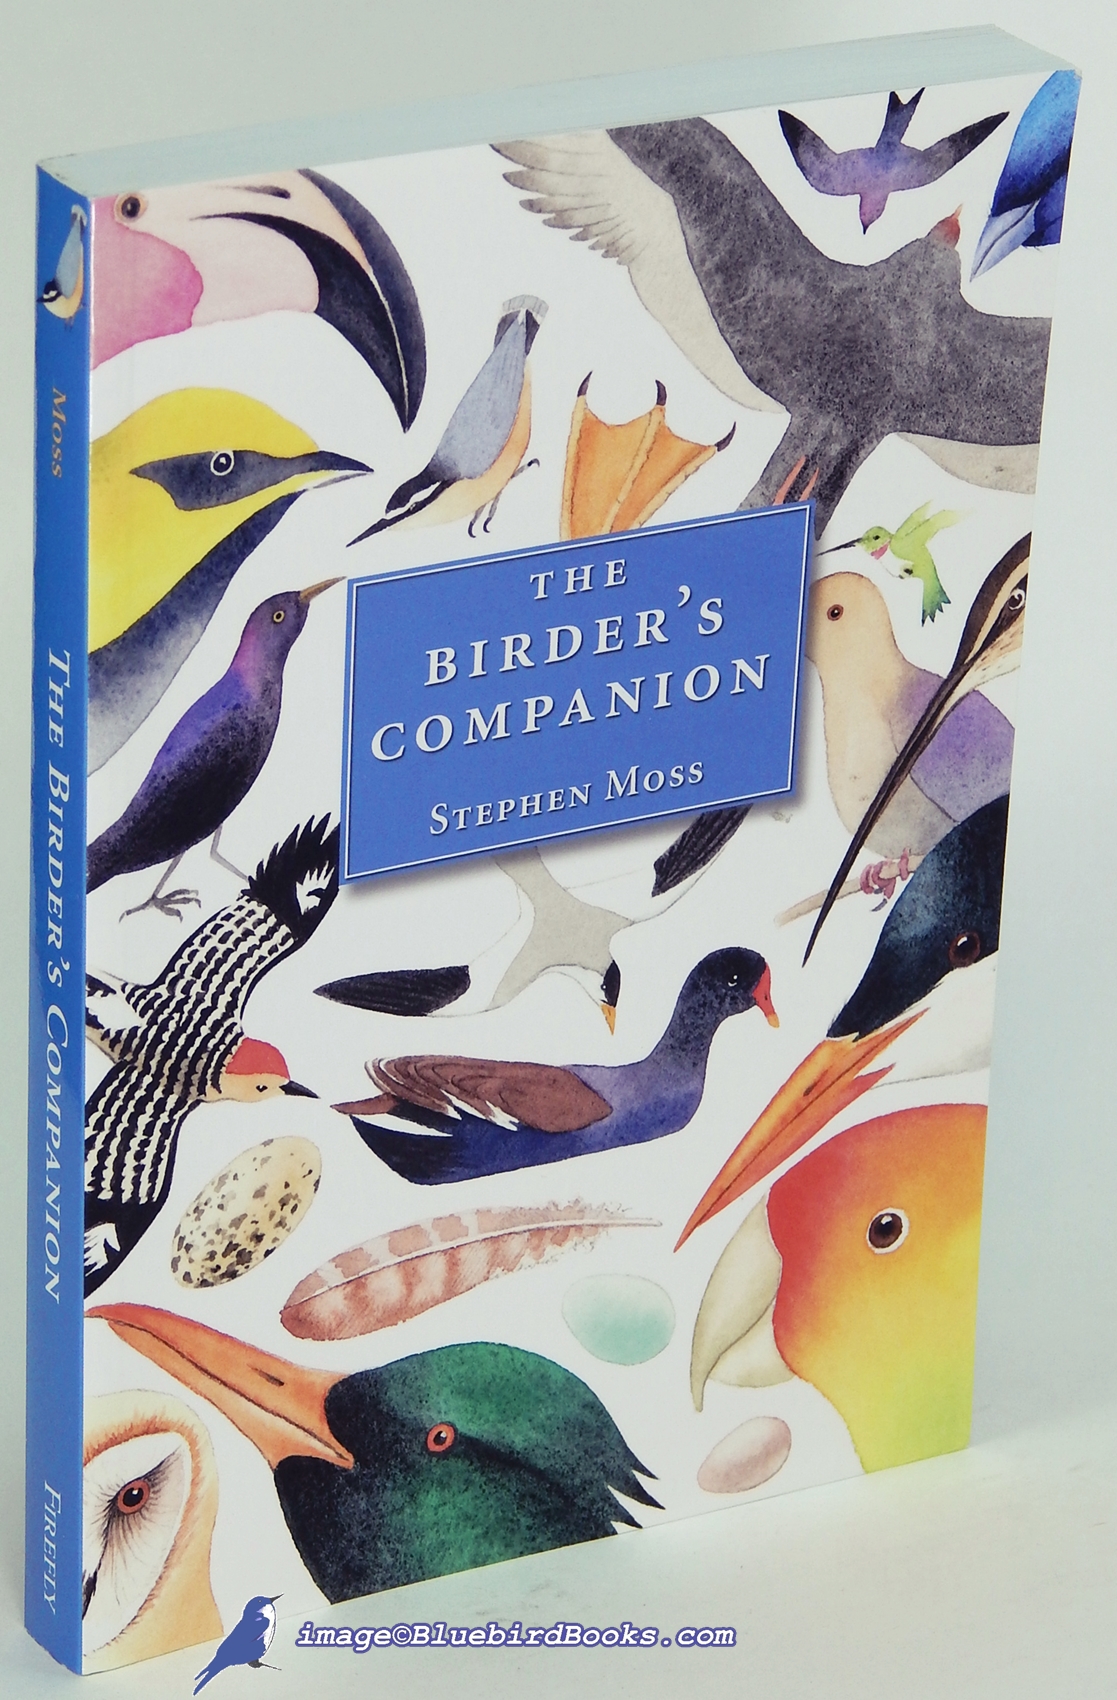 MOSS, STEPHEN (TEXT); DOBSON, CLIVE (ILLUSTRATIONS) - The Birder's Companion